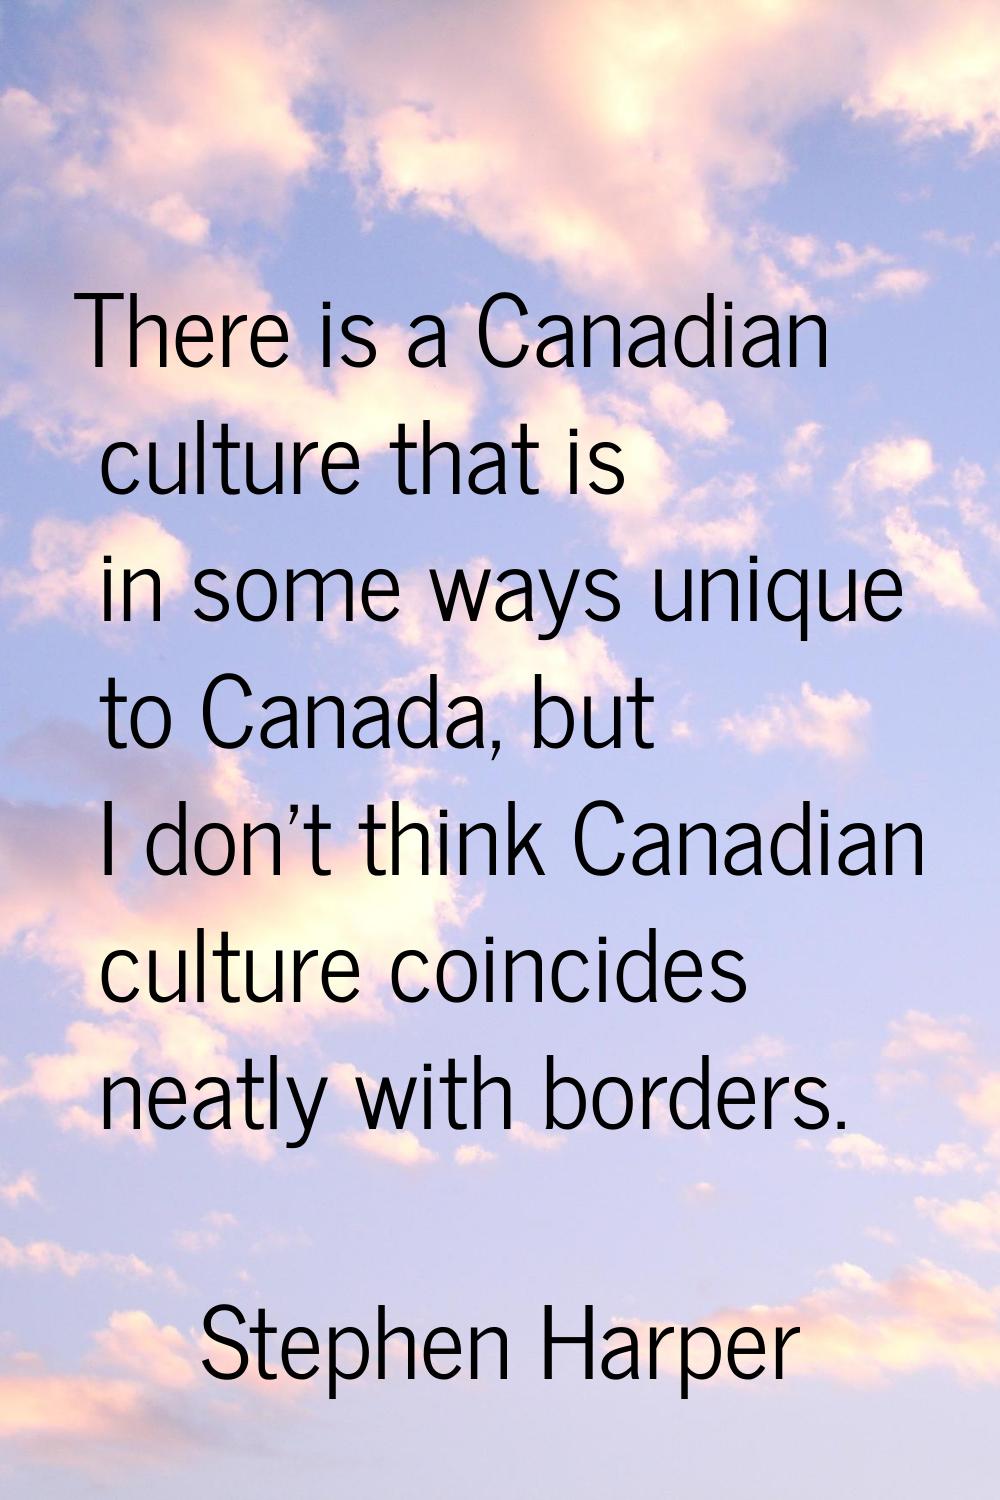 There is a Canadian culture that is in some ways unique to Canada, but I don't think Canadian cultu